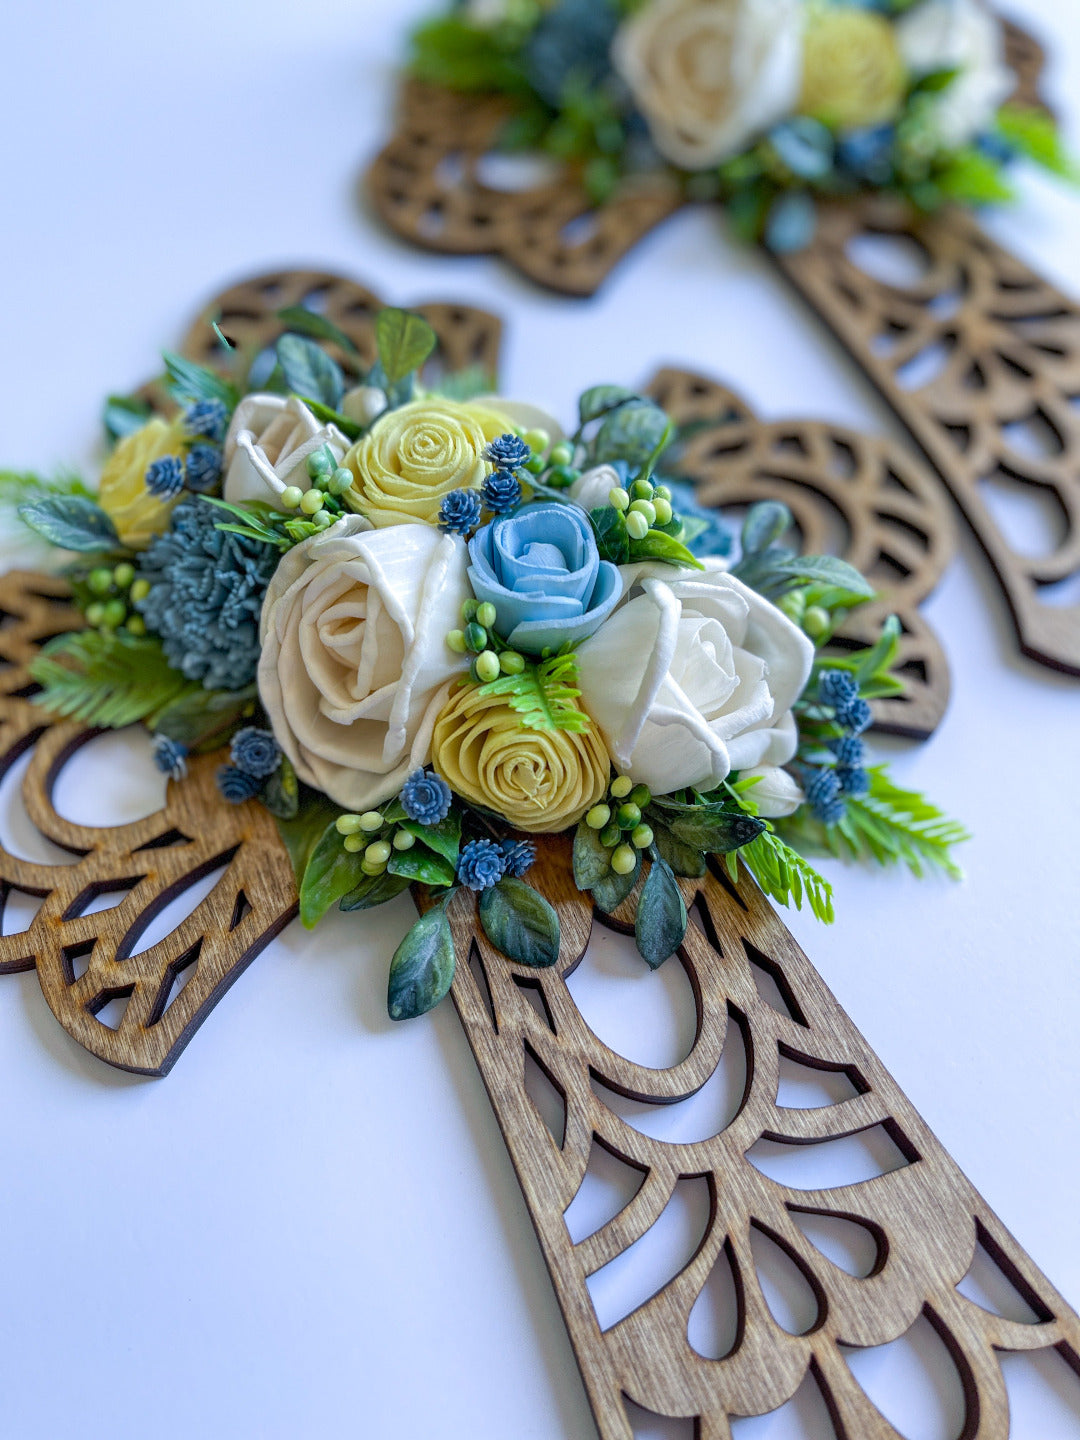 16 inch ornate cross with handcrafted blue, yellow, and ivory customized florals